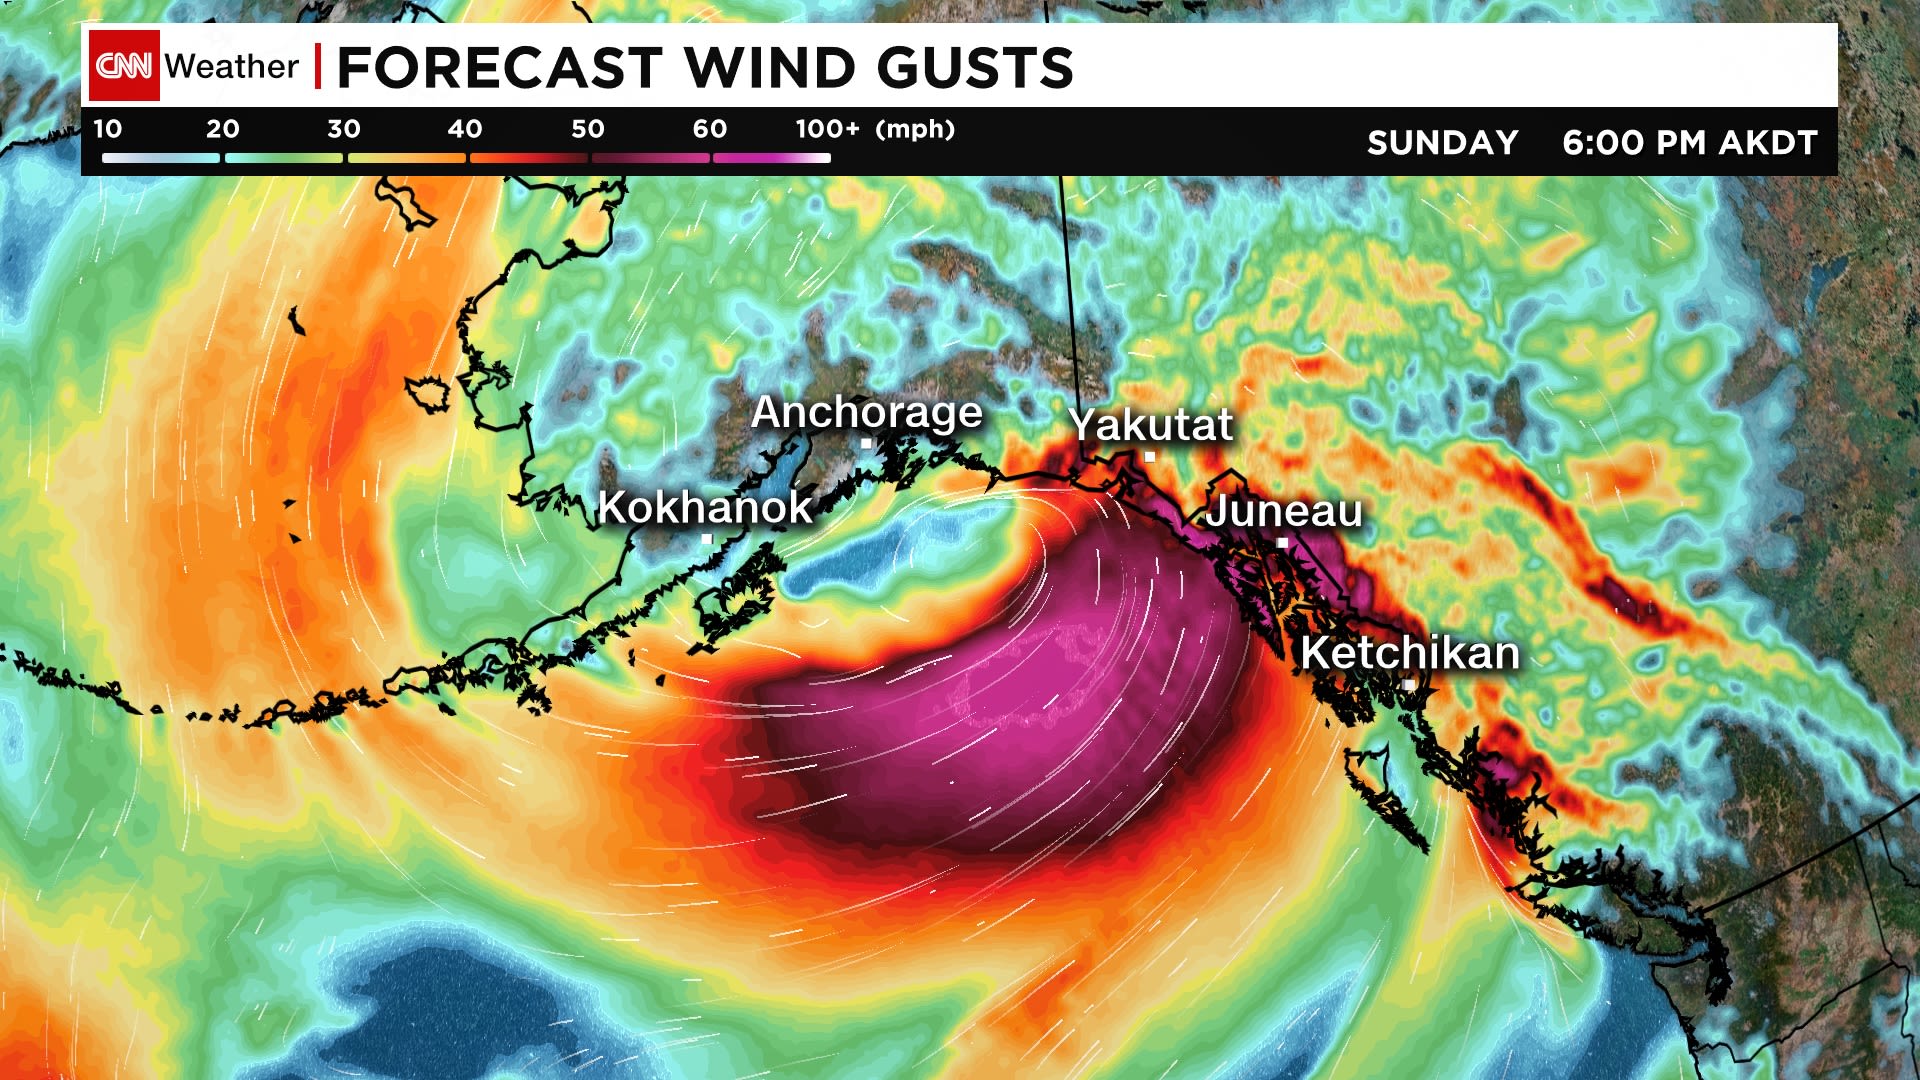 A rare hurricane force wind warning was just issued for Alaska